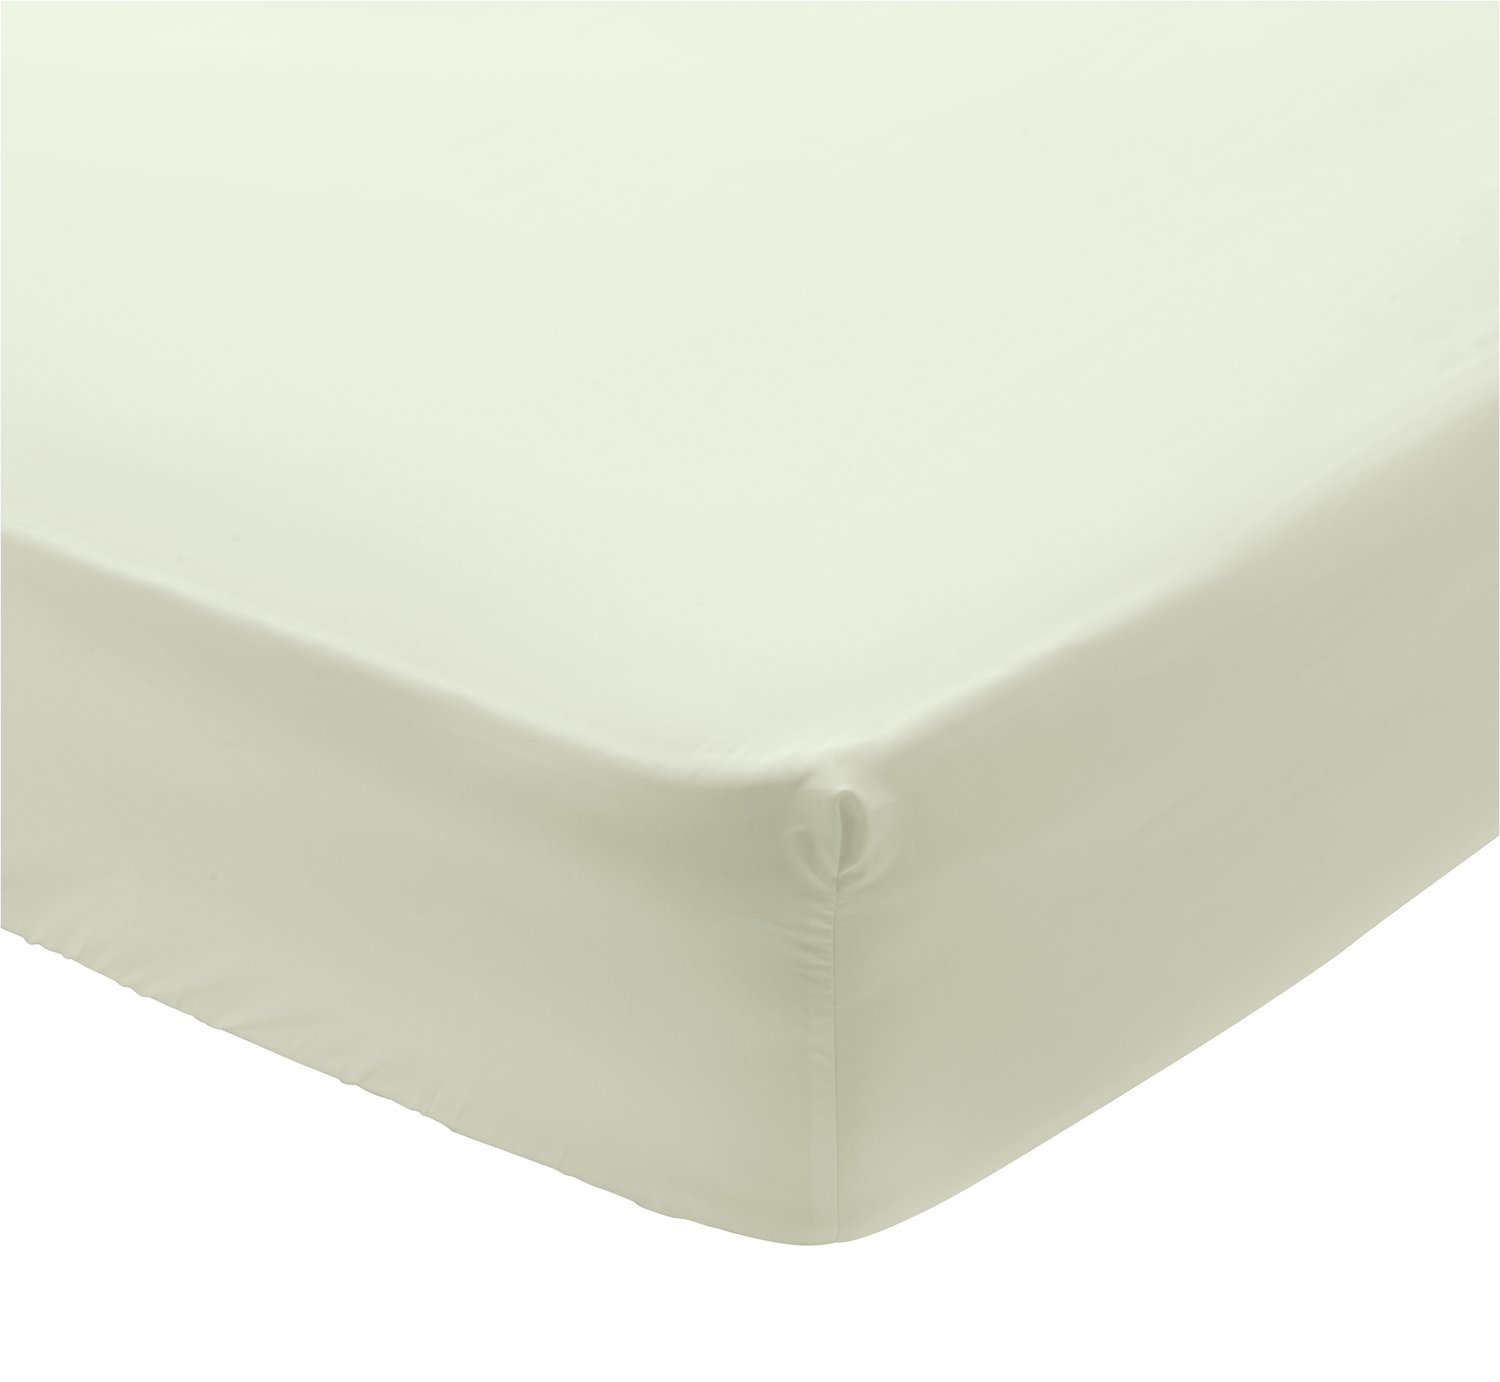 Argos Home 400TC Egyptian Cotton 35cm Fitted Sheet - King